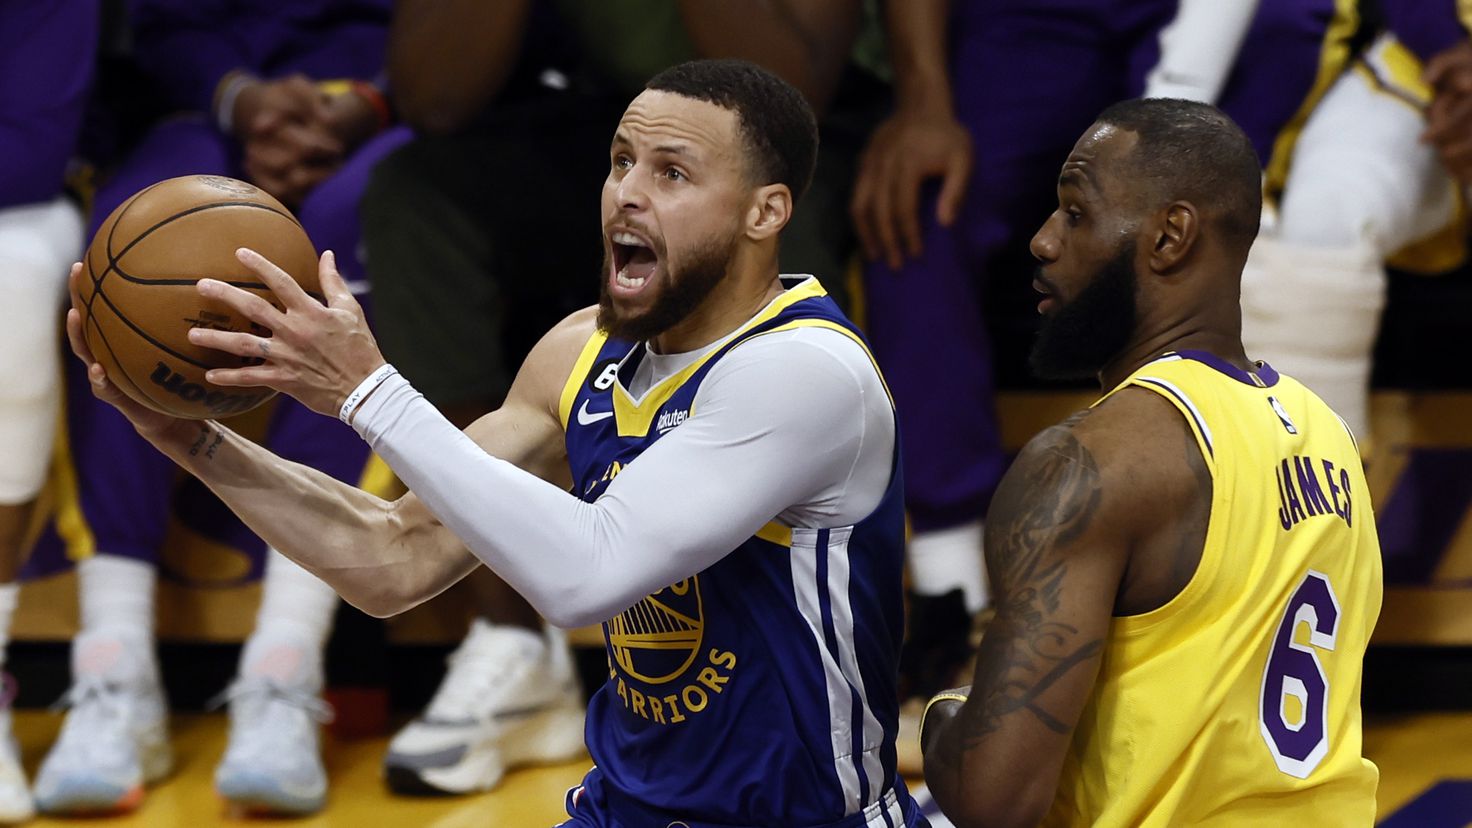 LeBron James could play in the Warriors with Steph Curry, they reveal plans that would make it possible
